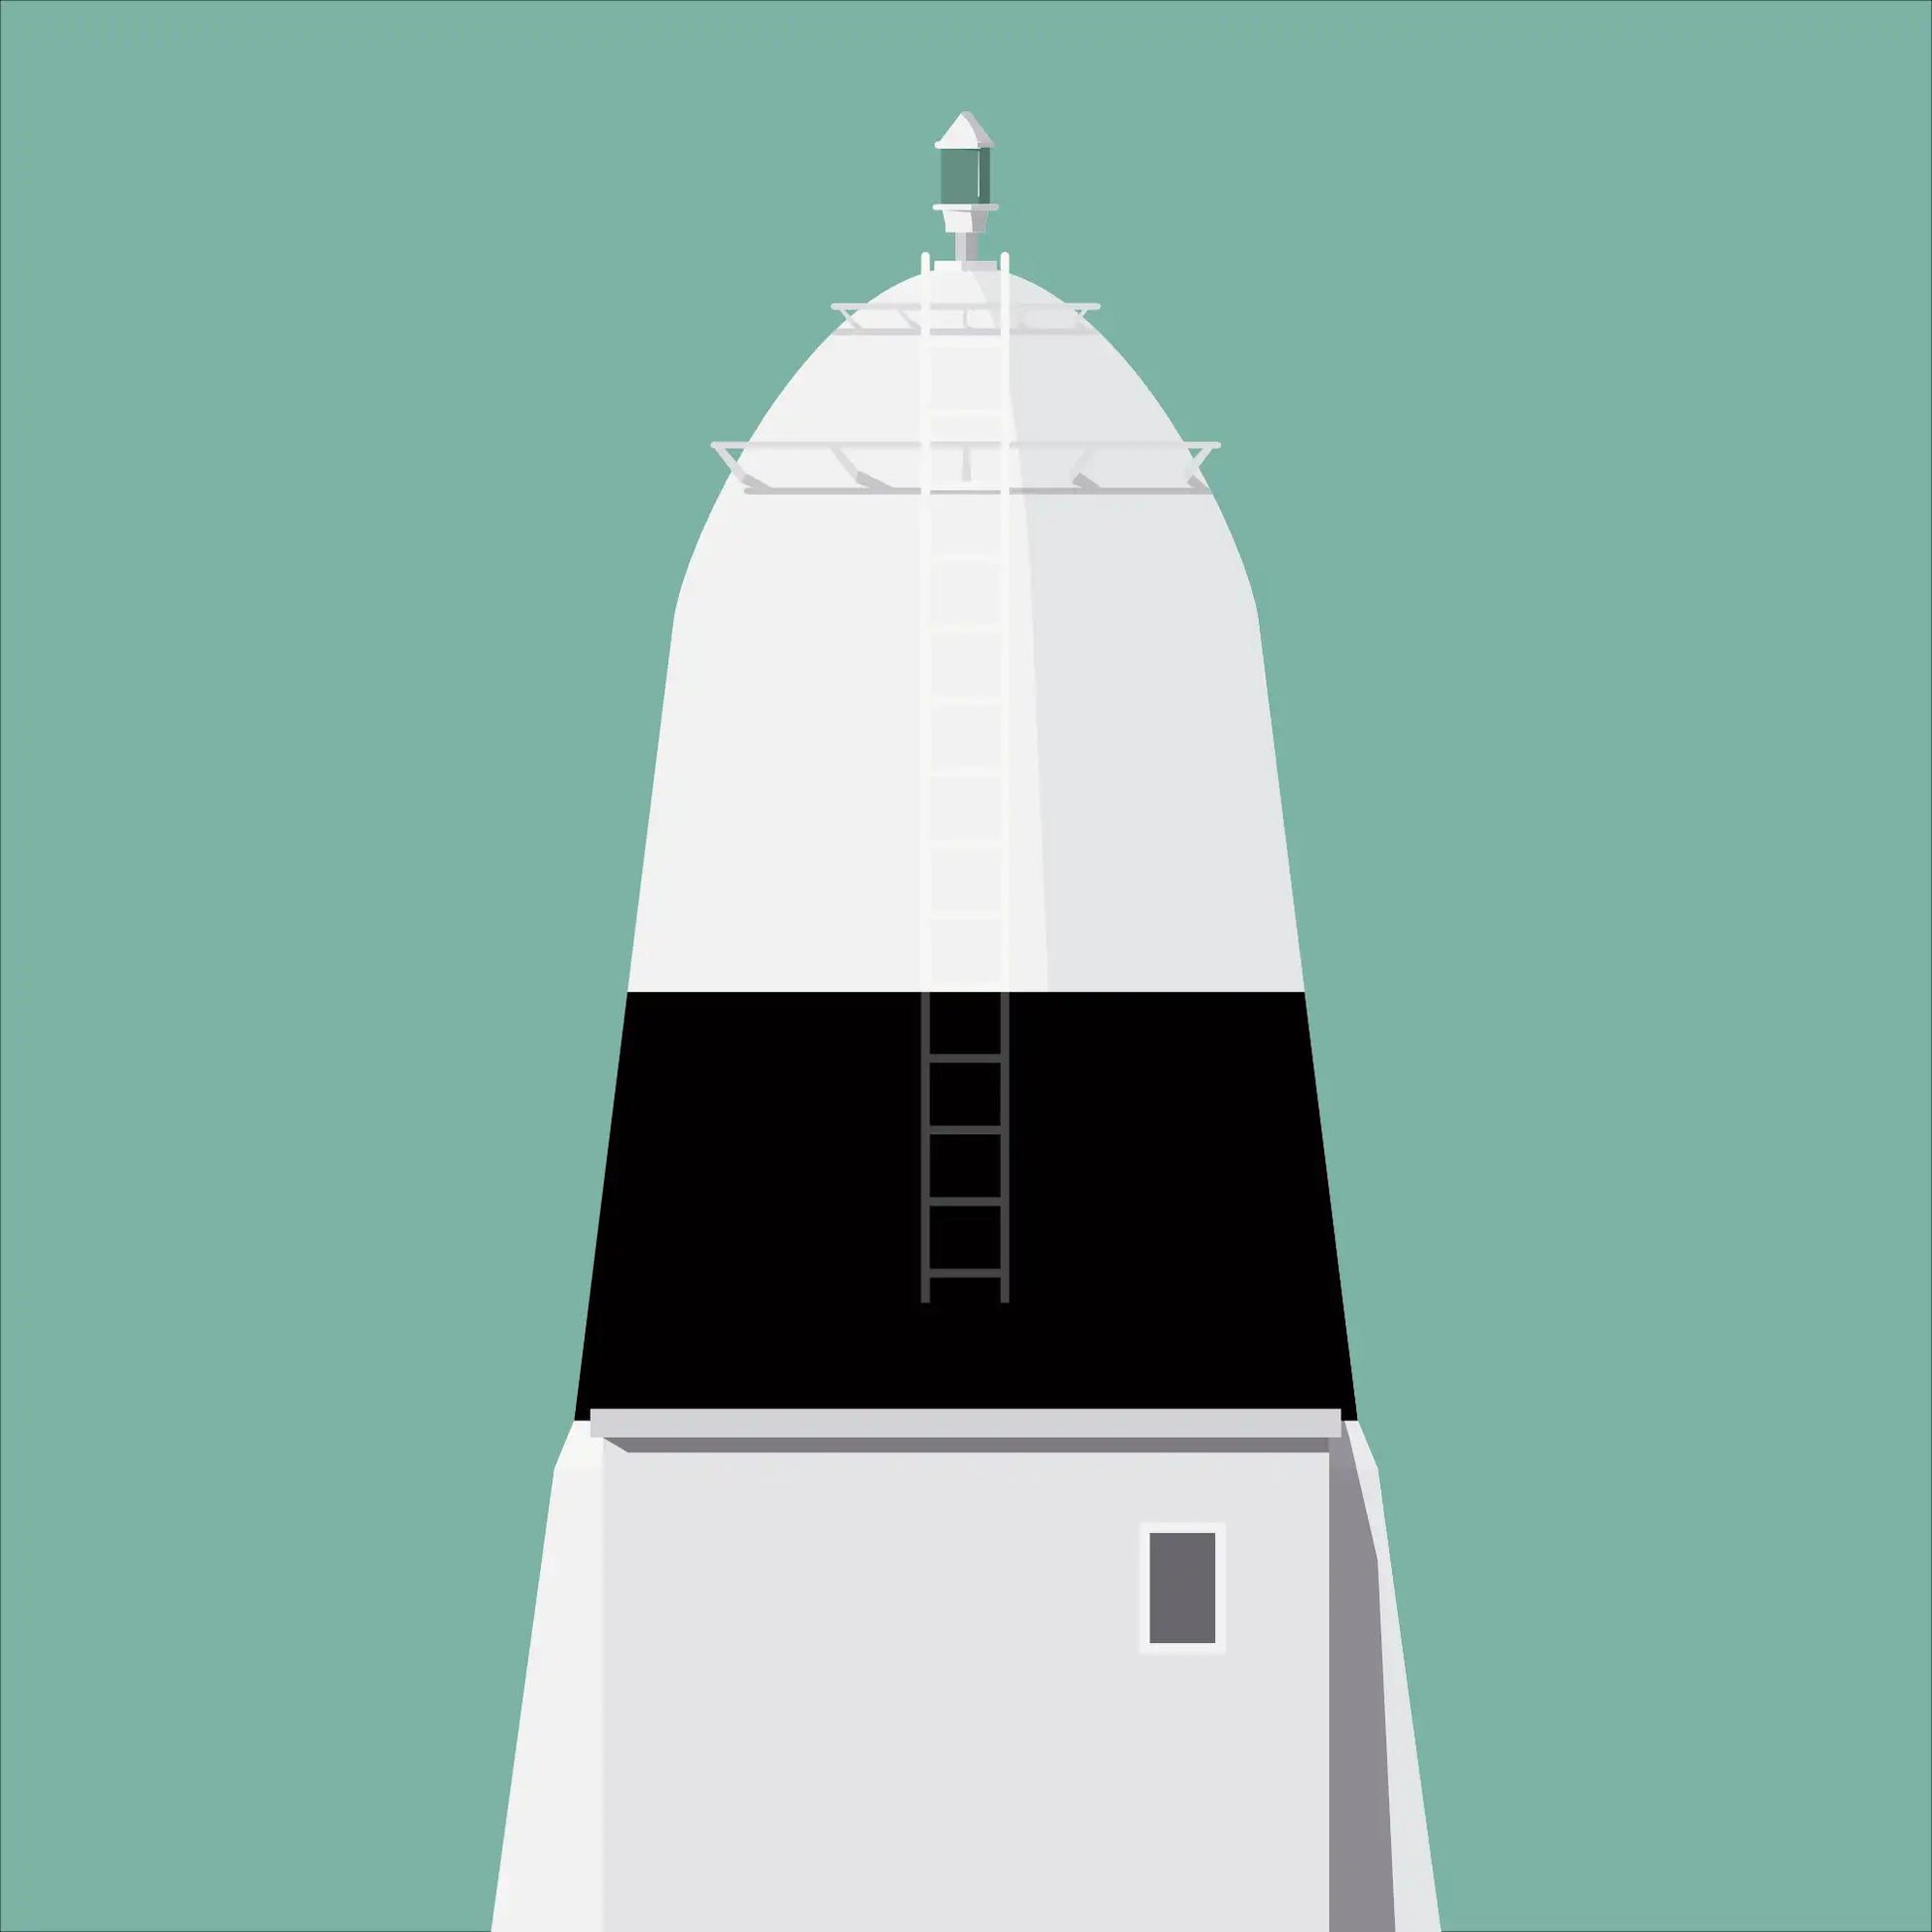 Contemporary graphic illustration of Ballagh Rocks lighthouse on a white background inside light blue square.